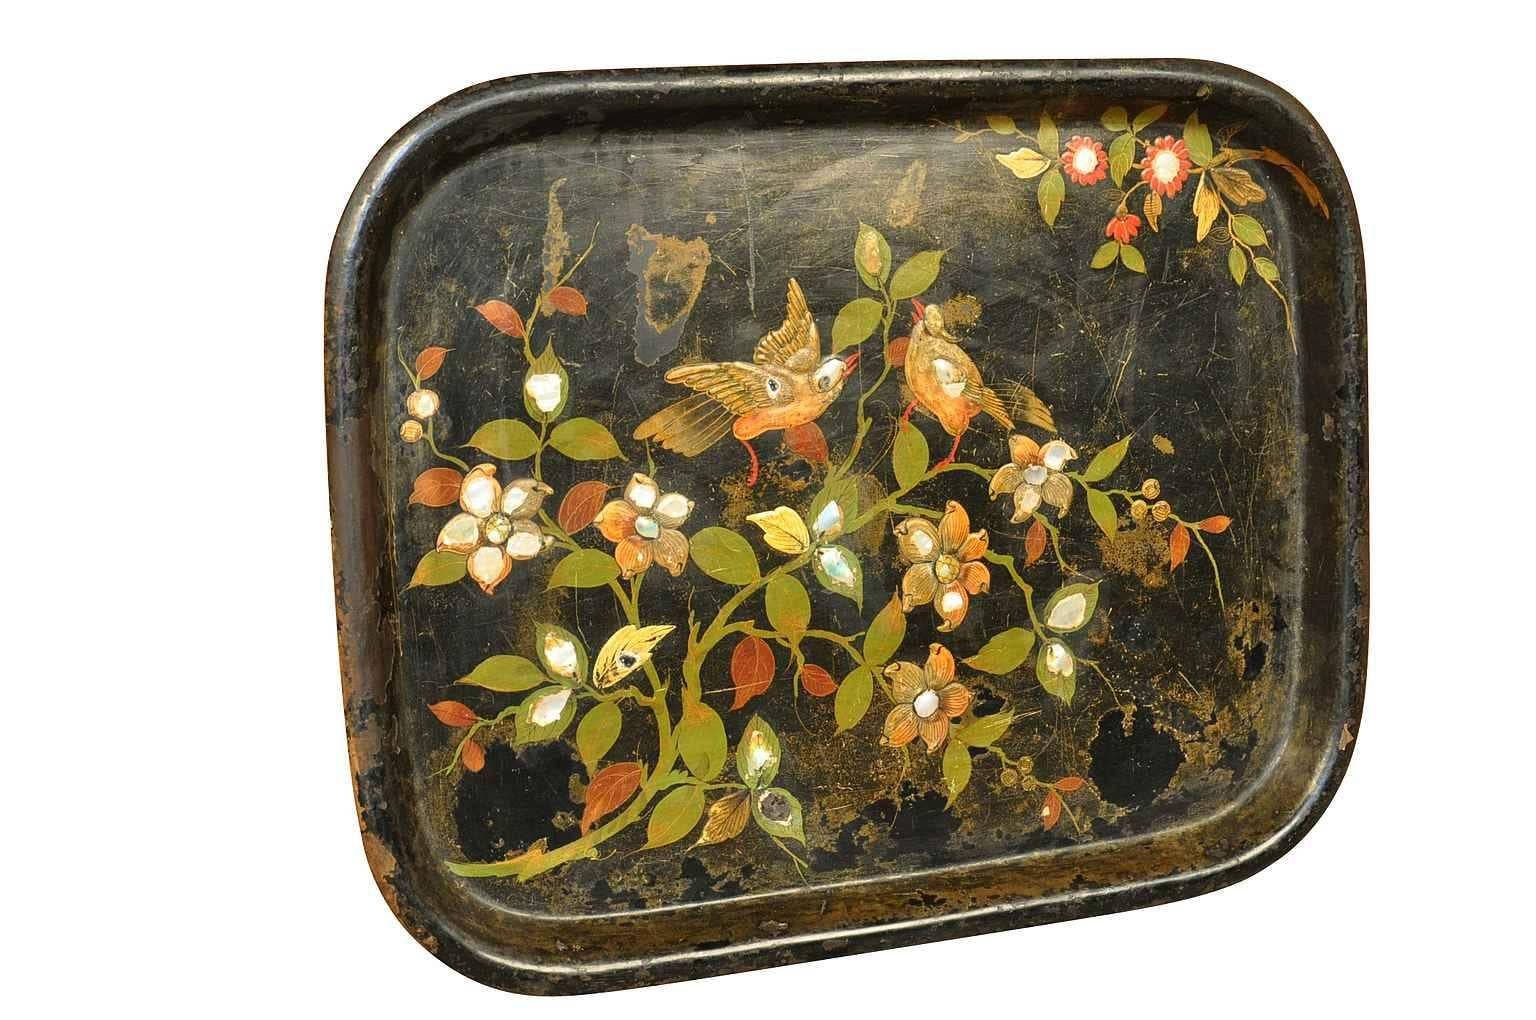 A stunning French early 19th century polychromed and mother of pearl tole tray.  The patina is wonderful - beautifully textured paintings and mother of pearl in very handsome colors.  A terrific accessory piece whether placed on an ottoman, table